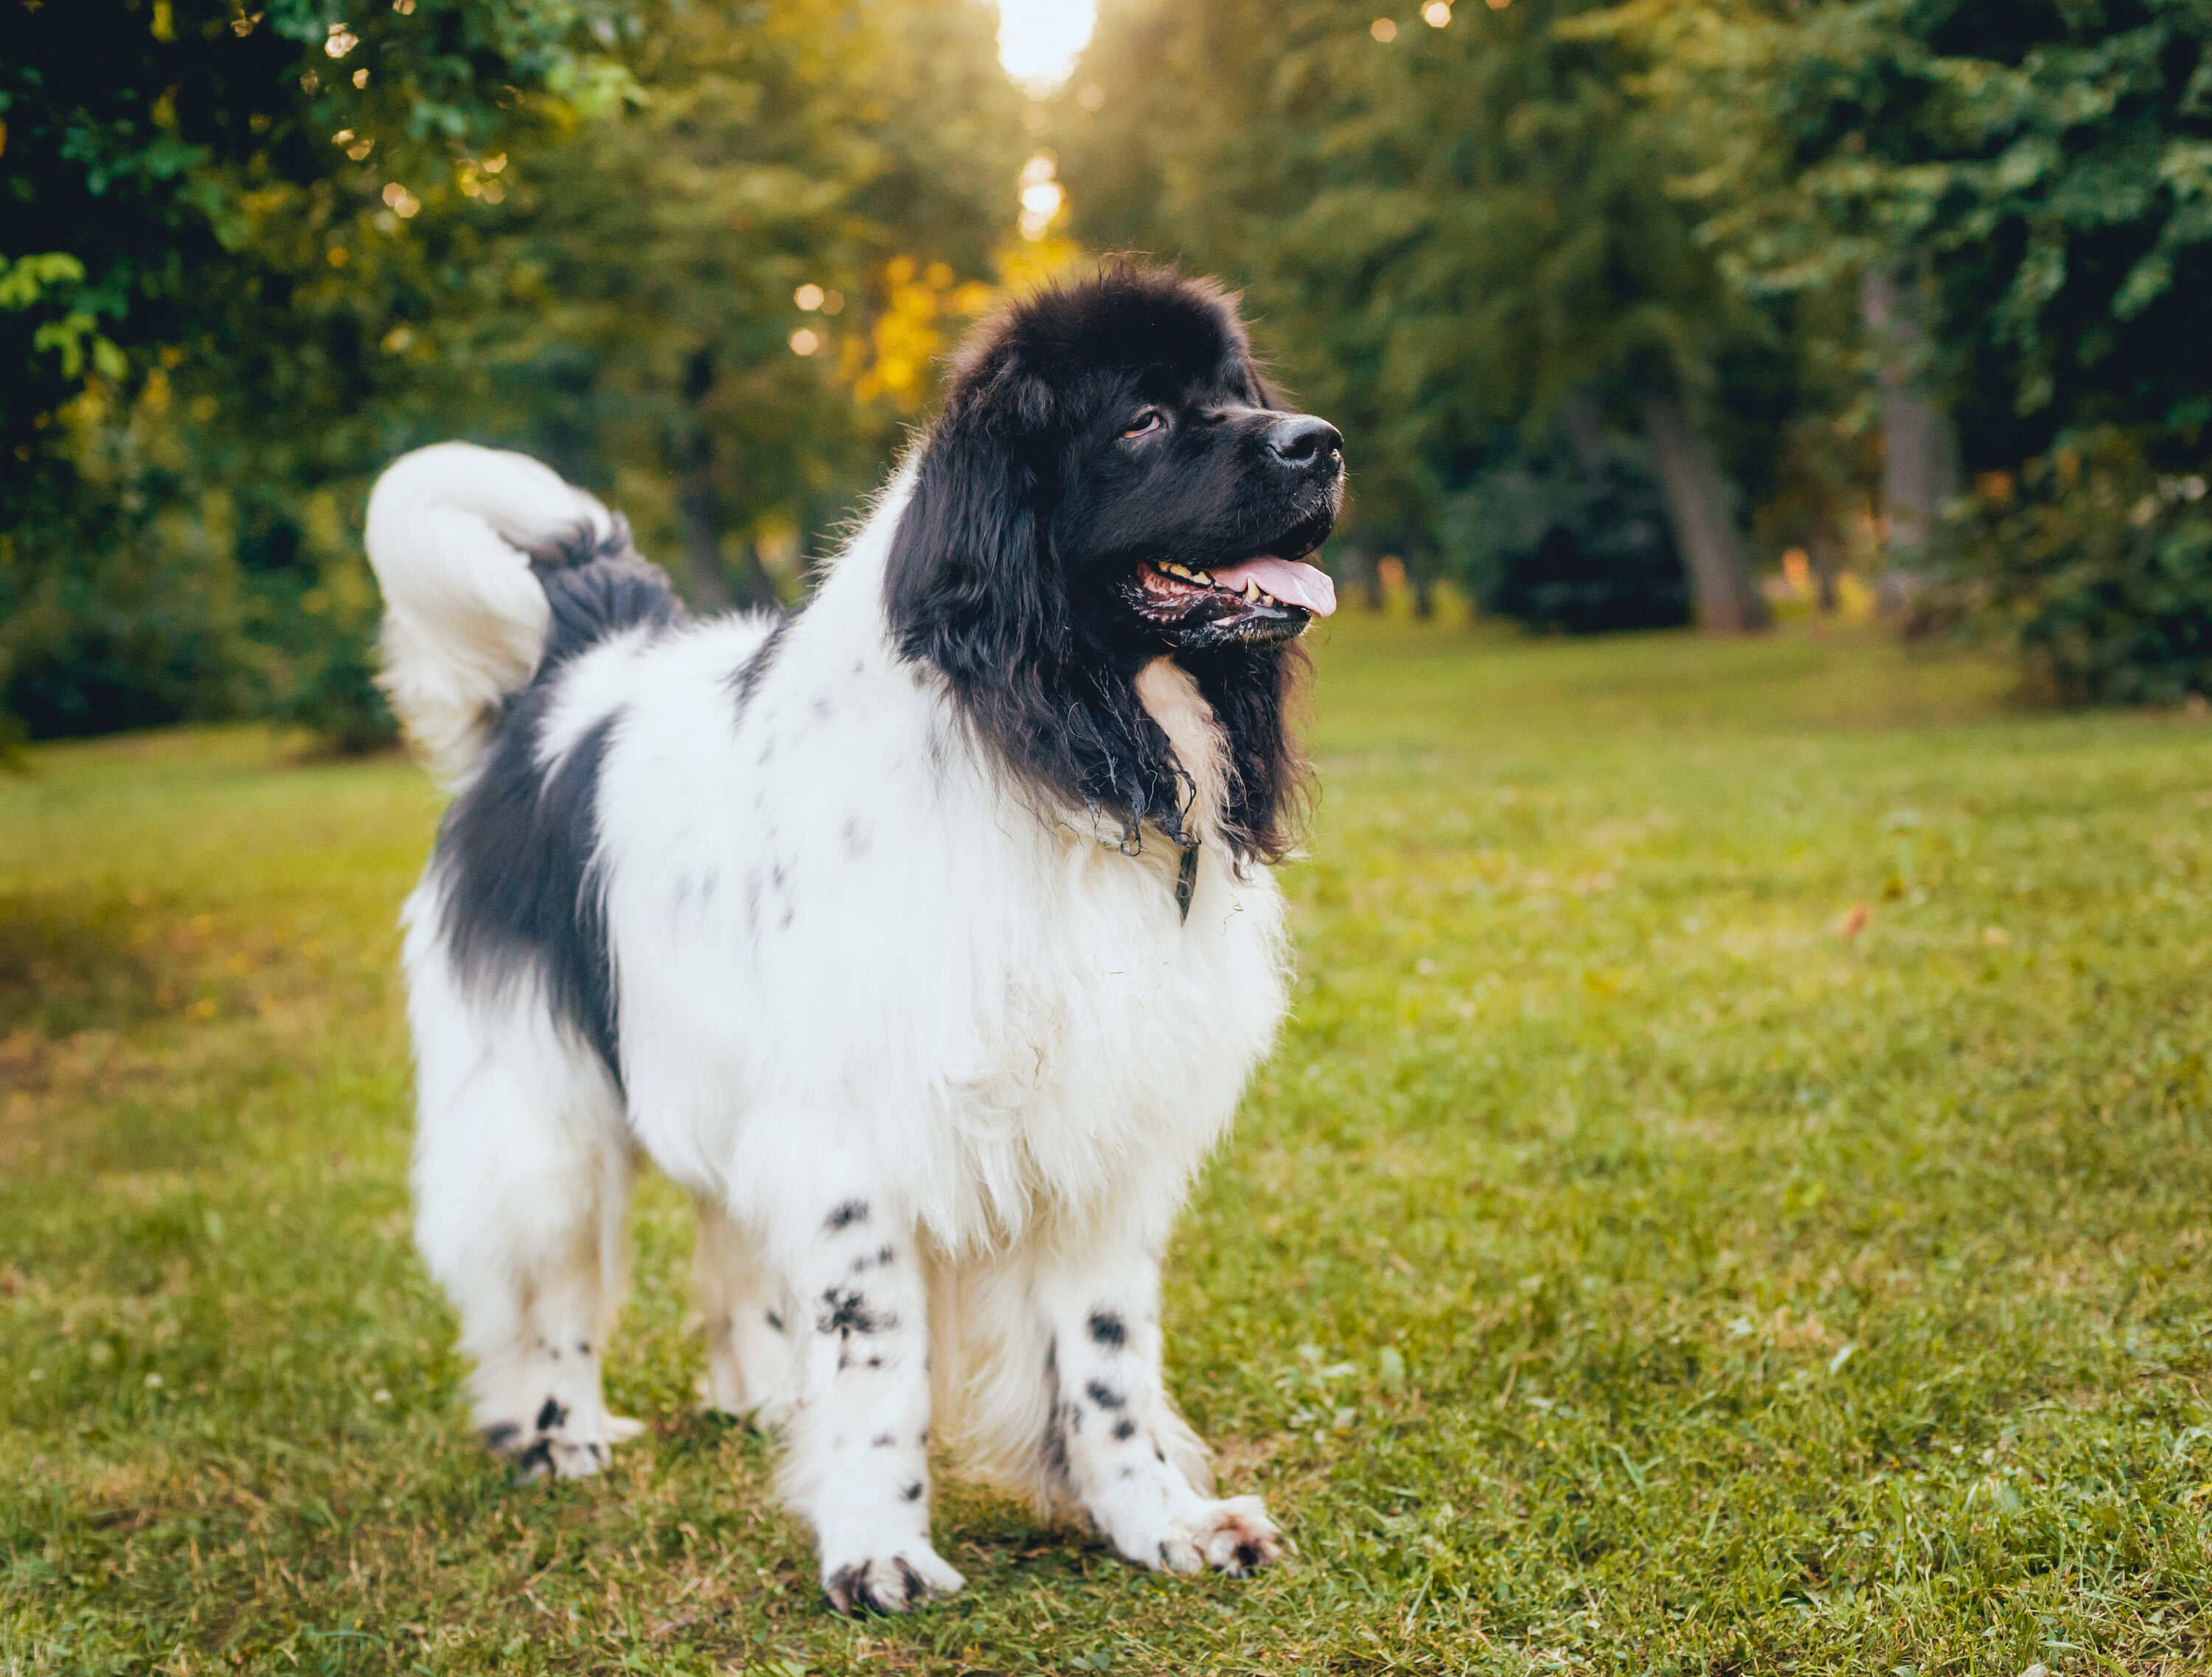 A black and white Newfoundland full size dog standing looking off to the side in green grass, with a lot of trees, and golden sunshine in the background